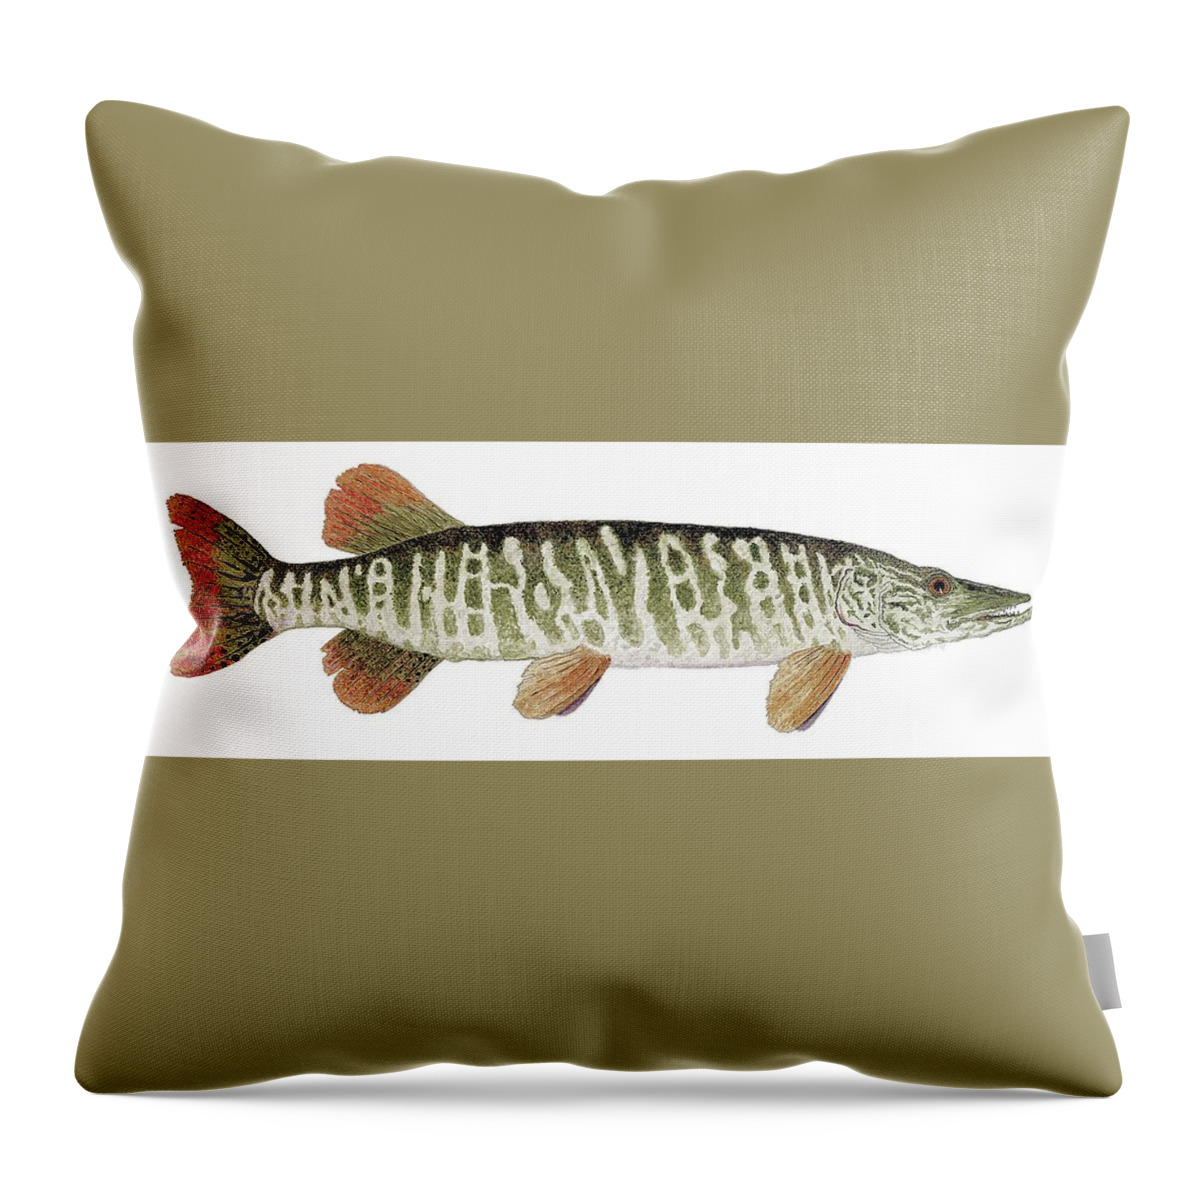 Tiger Throw Pillow featuring the painting Tiger Musky by Thom Glace